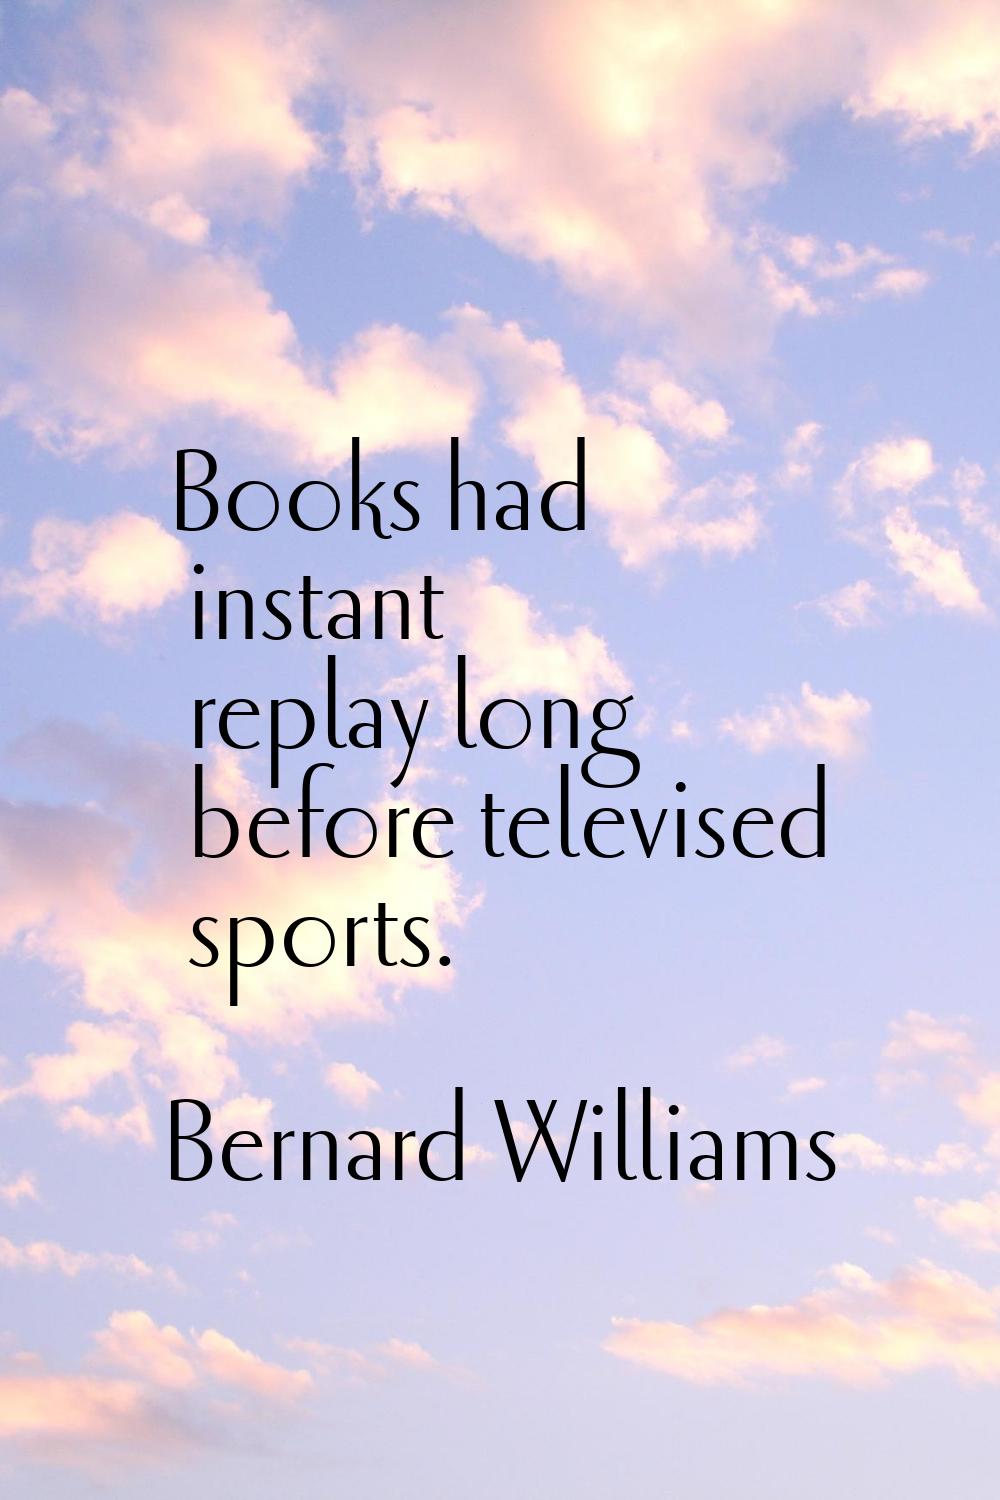 Books had instant replay long before televised sports.